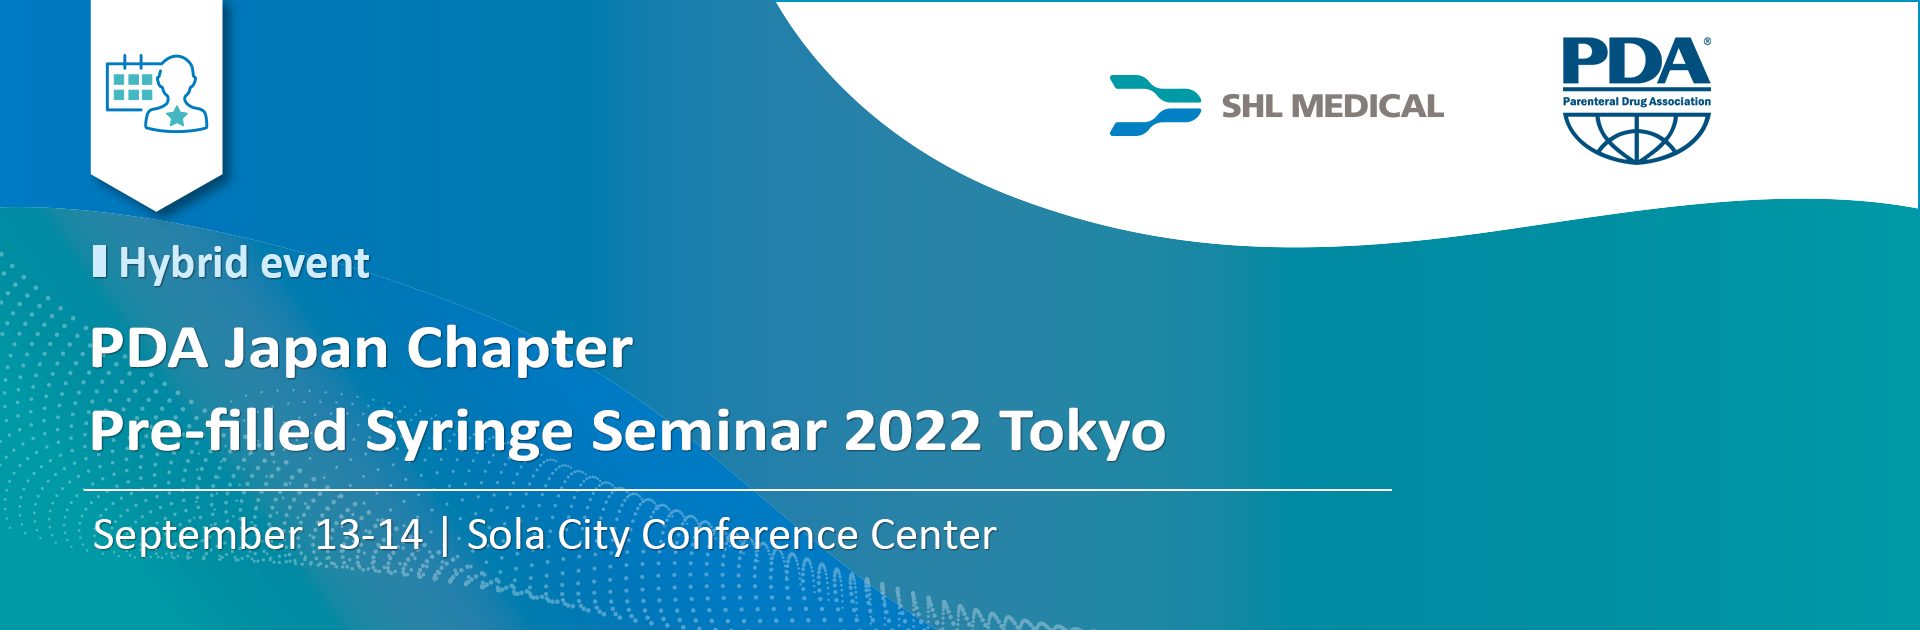 Banner of event participation announcement by SHL Medical titled “SHL Medical to speak and exhibit at PFSS Tokyo 2022”